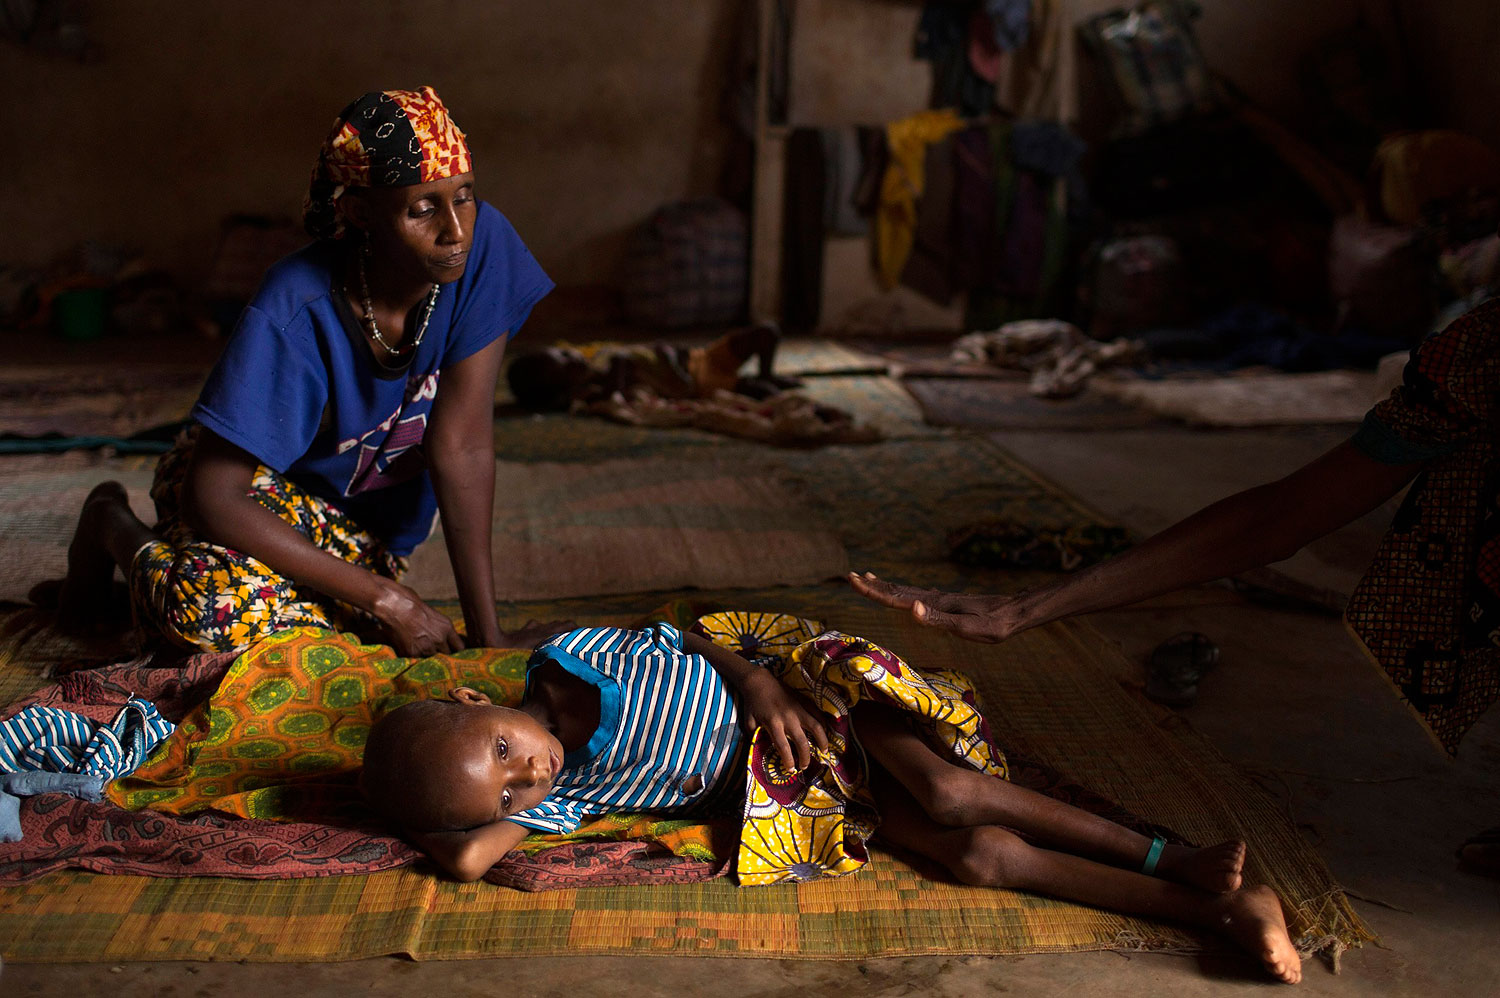 Relatives sit near Aliou Abalaye, 4, as he lies sick on the floor near Kilometre 12 (PK12), in Bangui, Central African Republic, where internally displaced Muslims are stranded due to the ongoing sectarian violence, on March 6, 2014. (SIEGFRIED MODOLA—REUTERS)